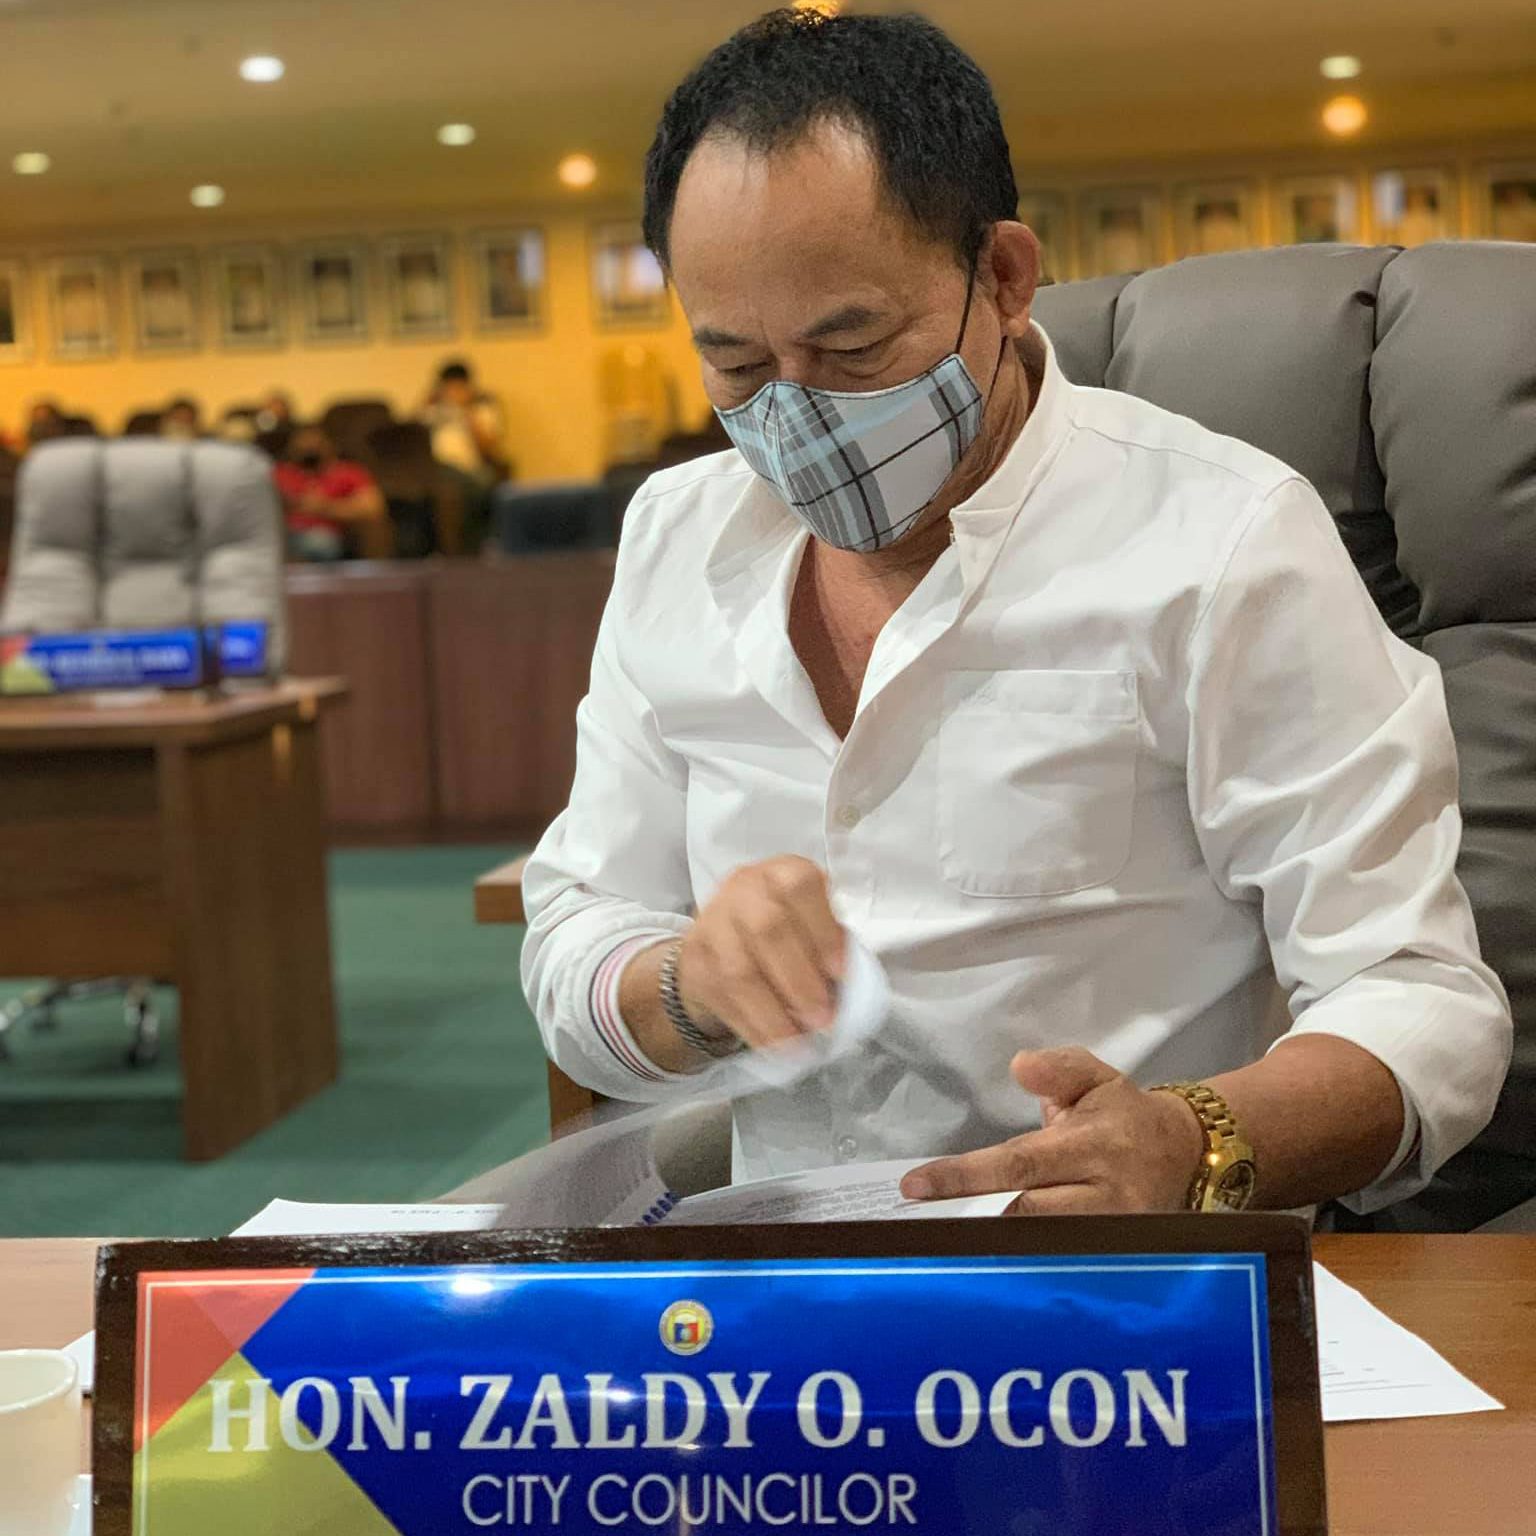 Cagayan de Oro councilor gets schooled for Bible use in cemetery project debate